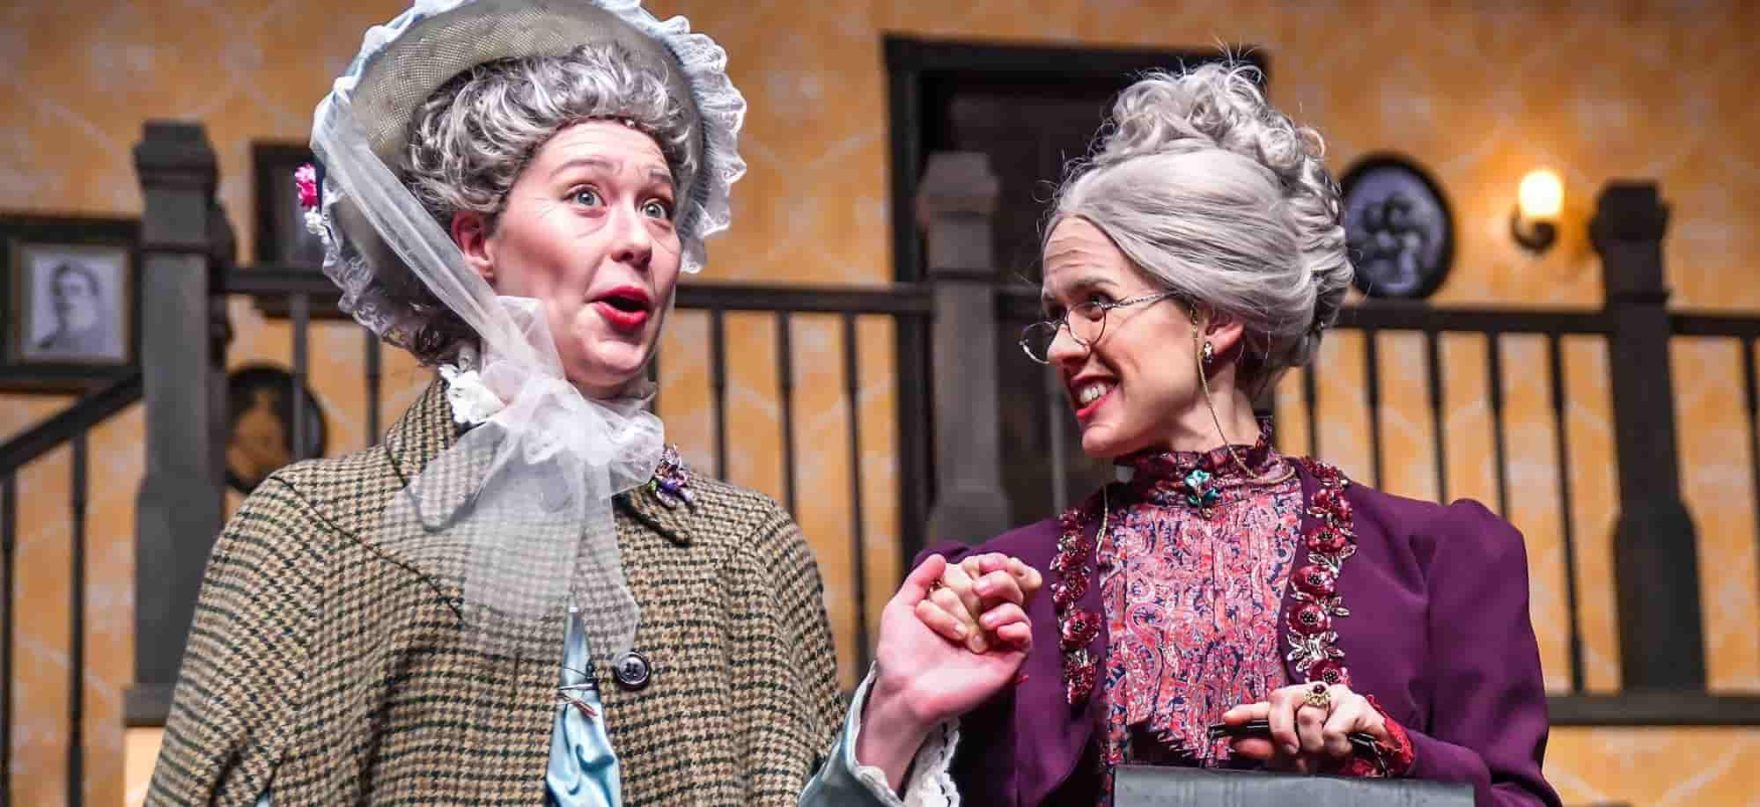 Two Regent University students costumed as elderly women perform on stage.